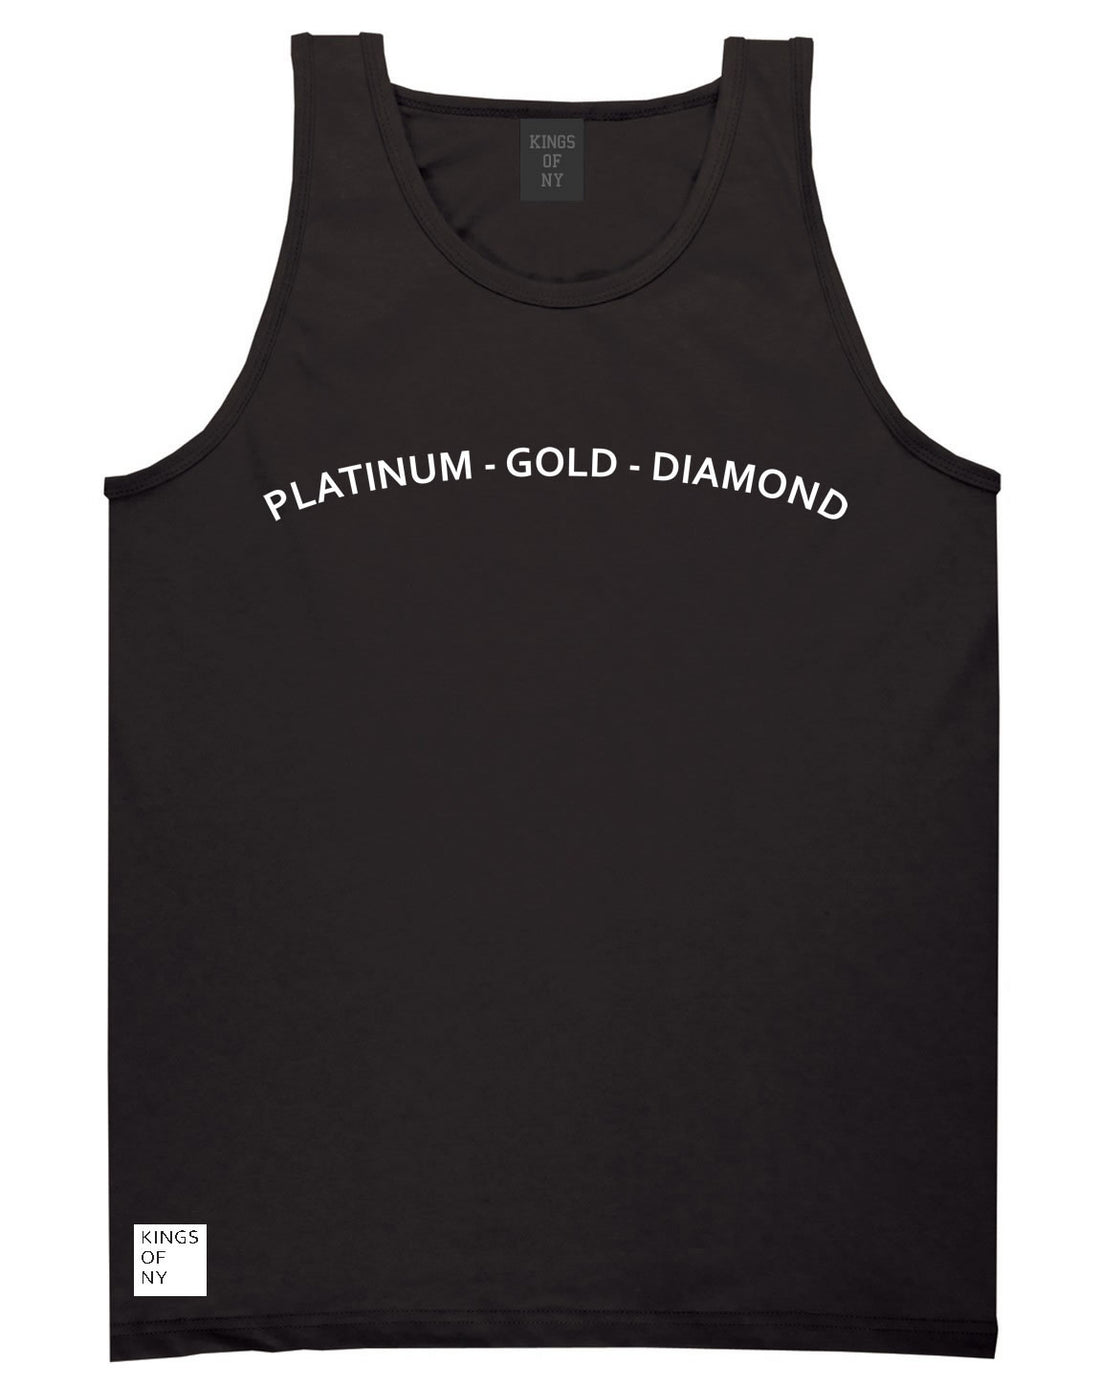 Platinum Gold Diamond Tank Top in Black by Kings Of NY